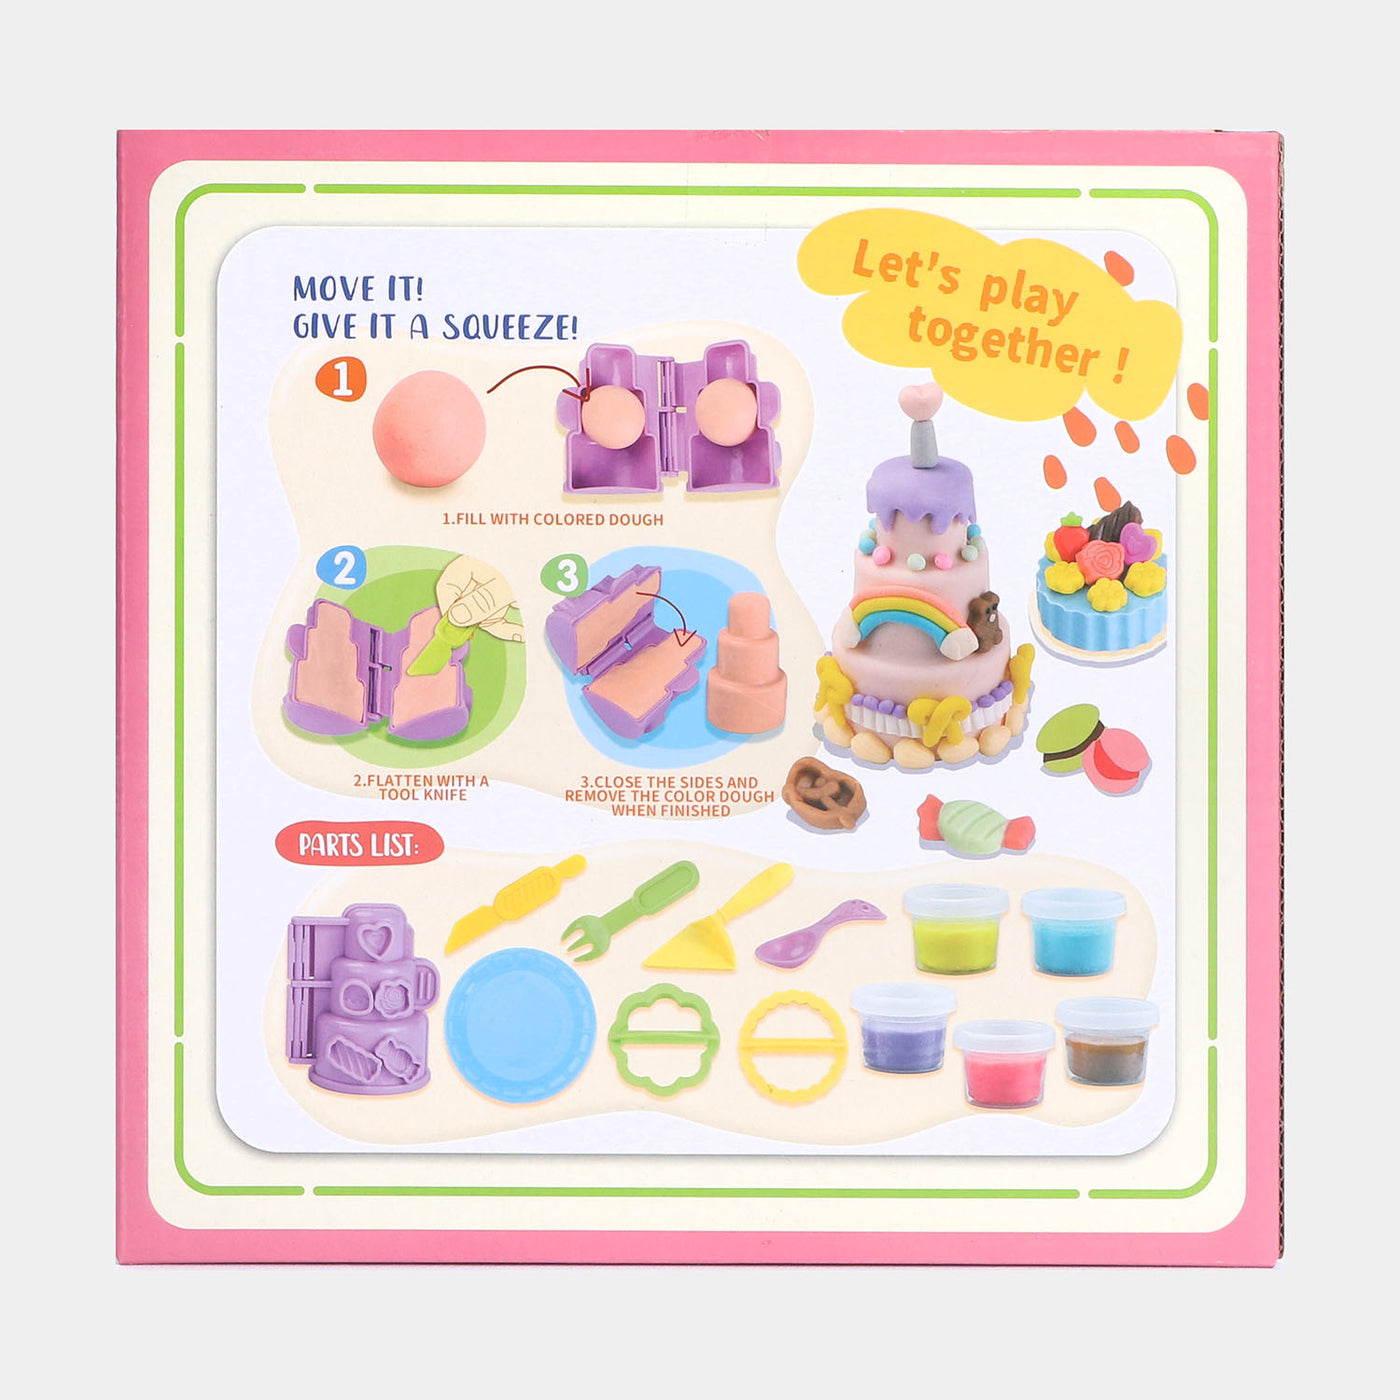 Sweet Cake Clay Play Set For Kids